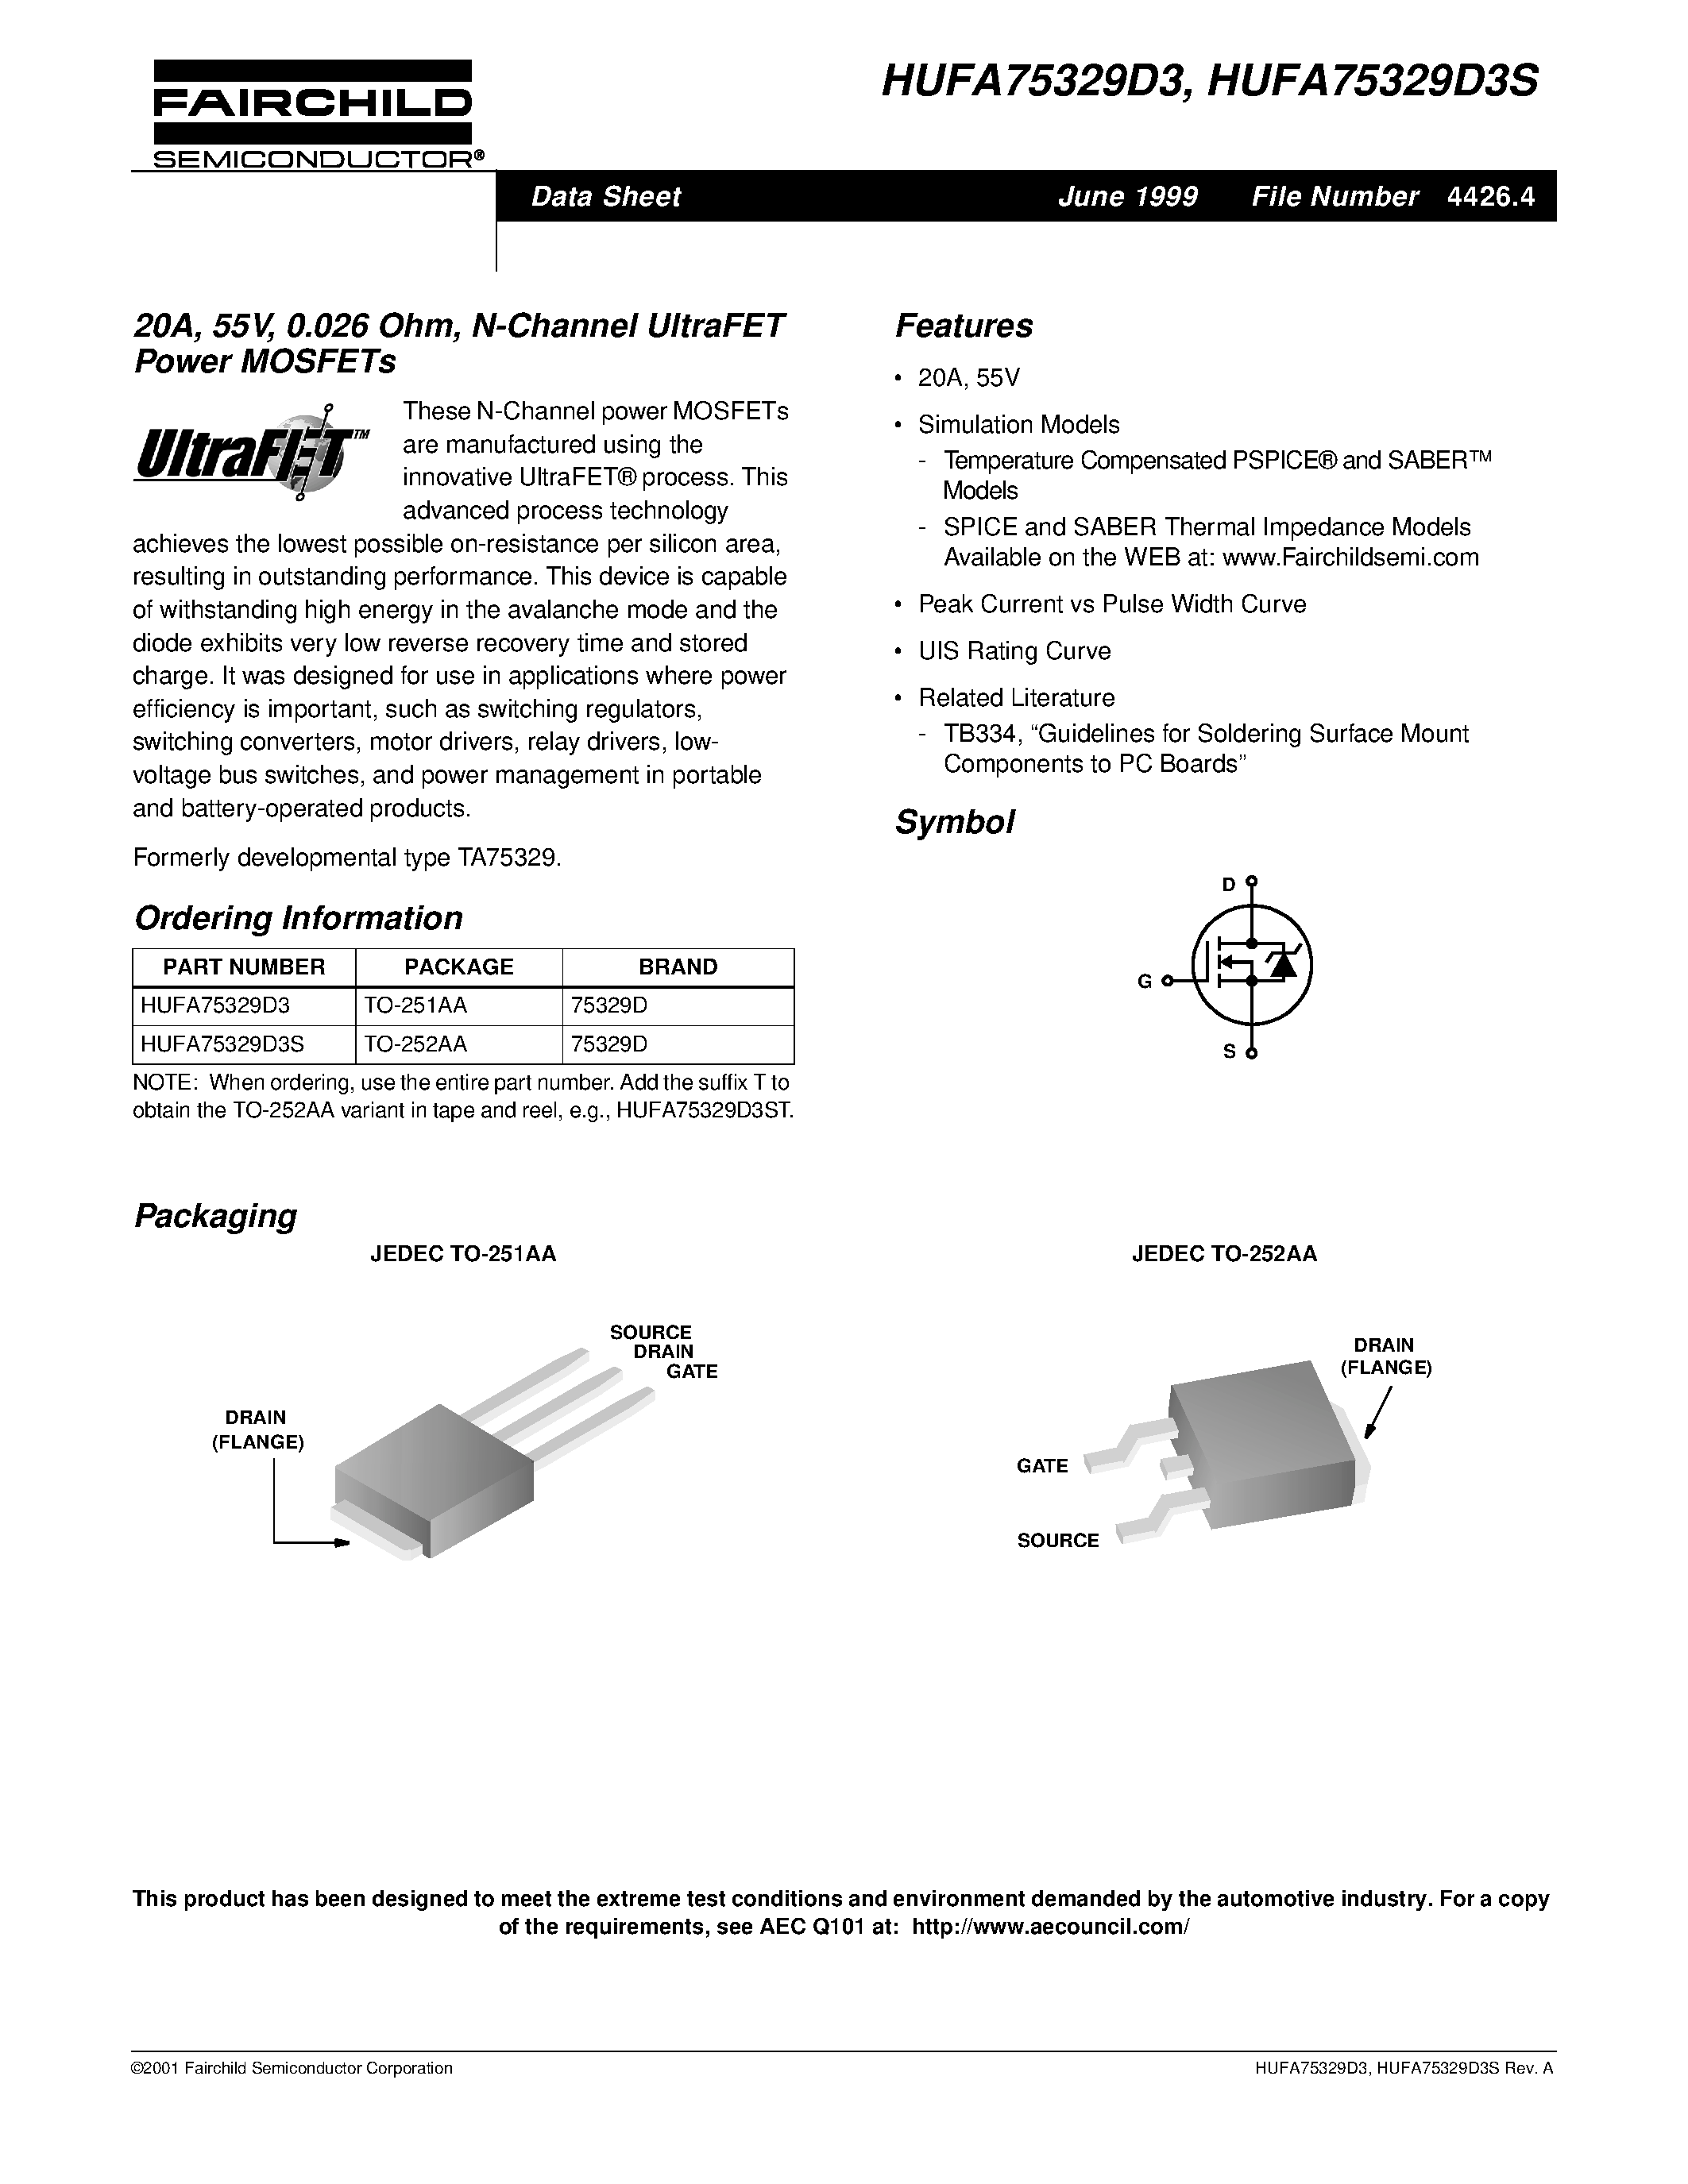 Datasheet HUFA75333G3 - 66A/ 55V/ 0.016 Ohm. N-Channel UltraFET Power MOSFETs page 1